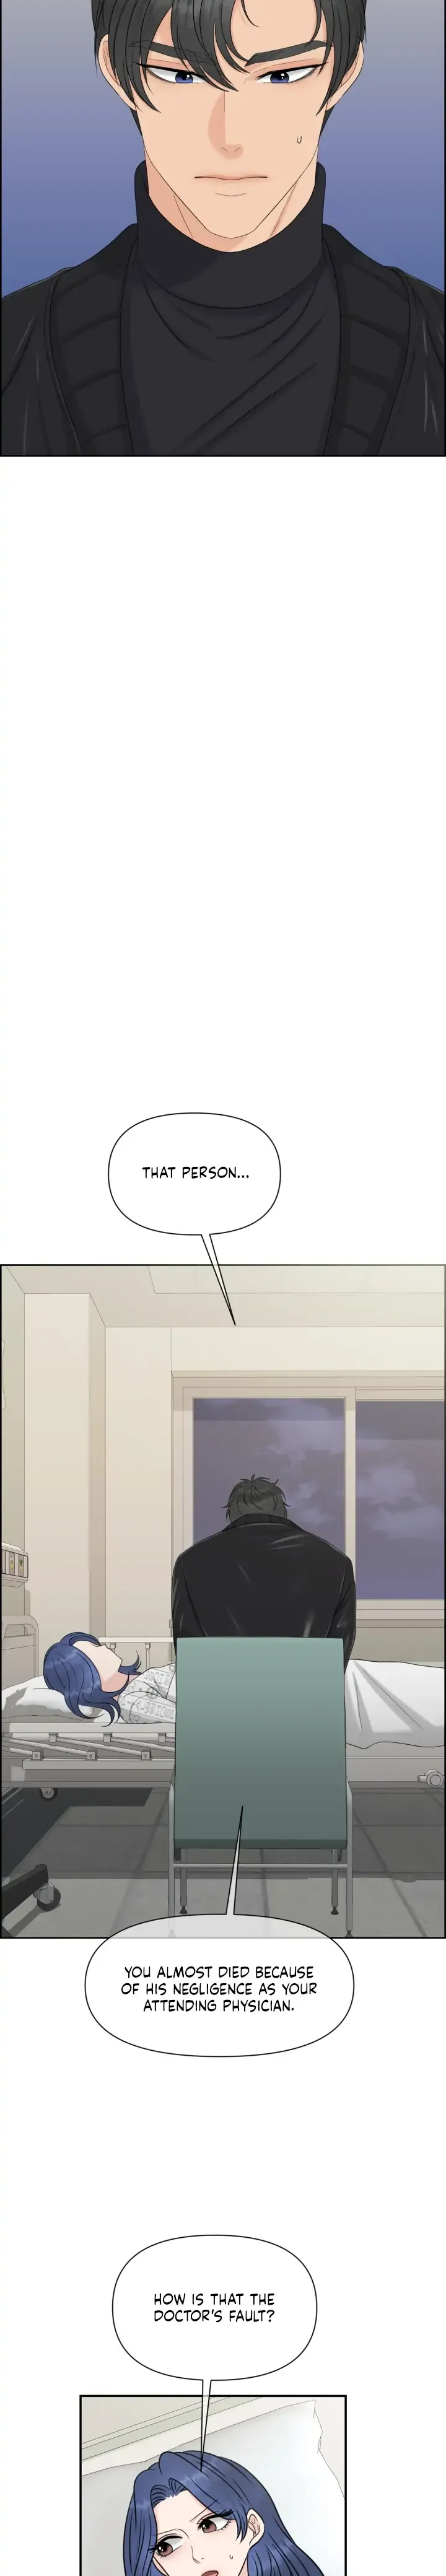 Which Alpha Do You Want? chapter 39 - Page 4